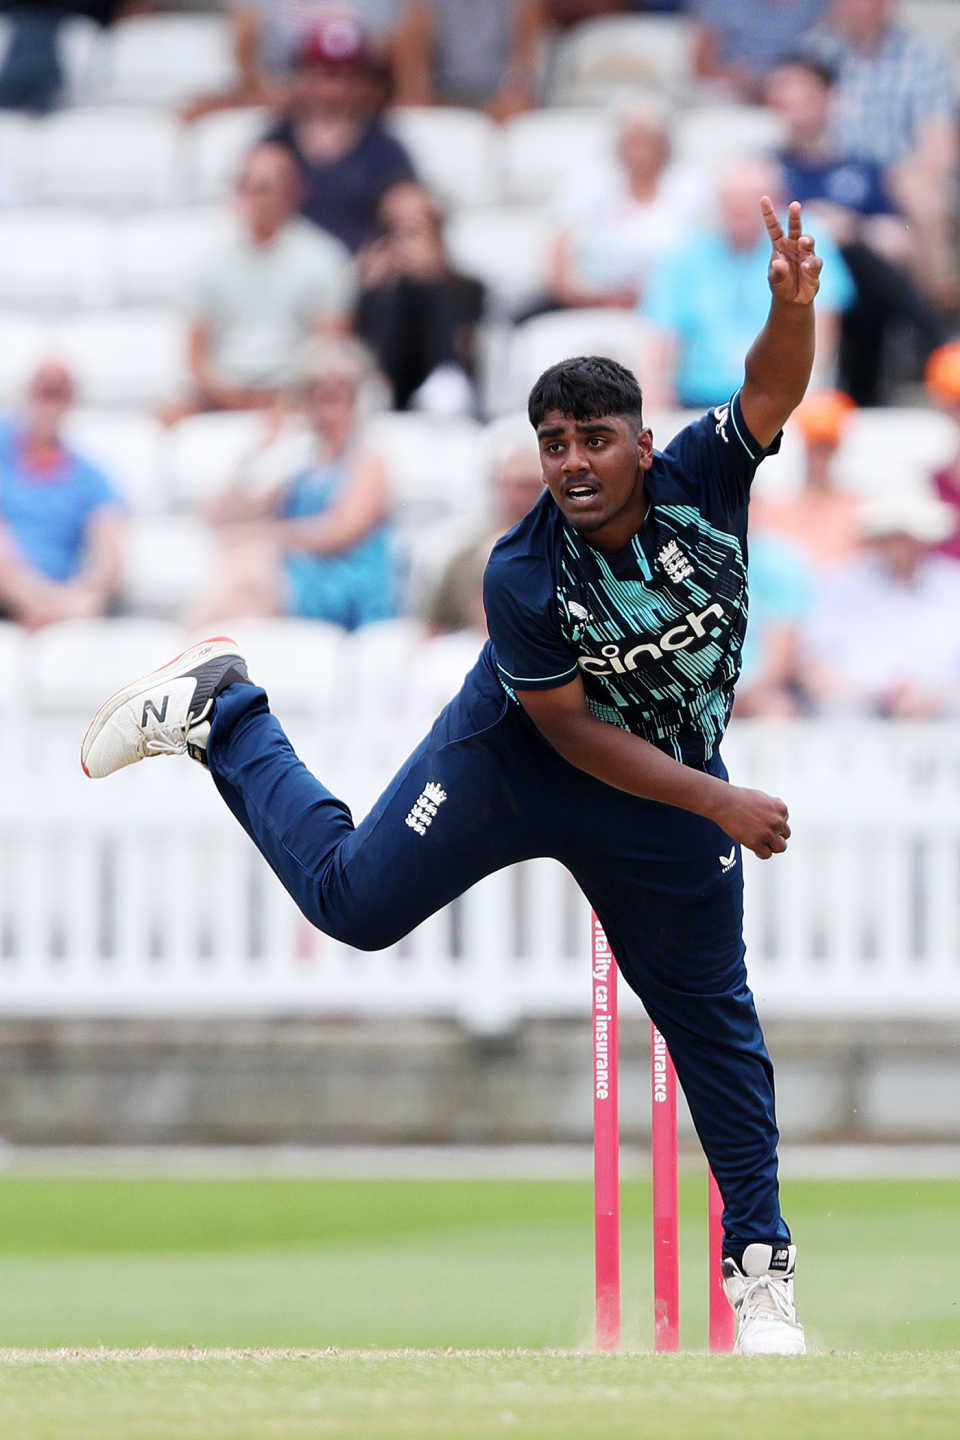 Rehan Ahmed was making his Lions debut, England Lions vs South Africa, tour match, Taunton, July 12, 2022